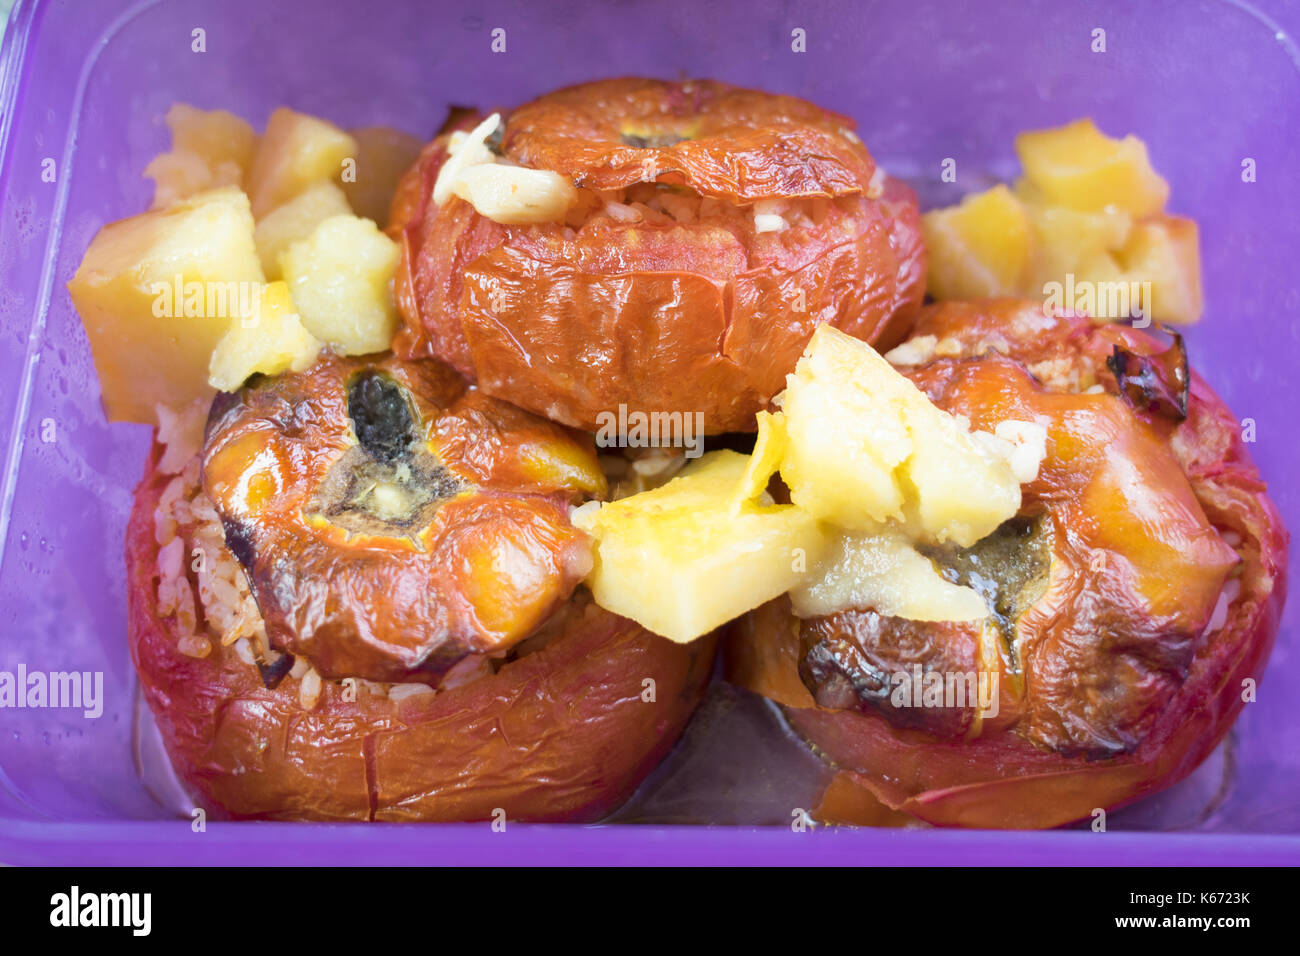 tomatoes stuffed with rice near the fresh fruit Stock Photo